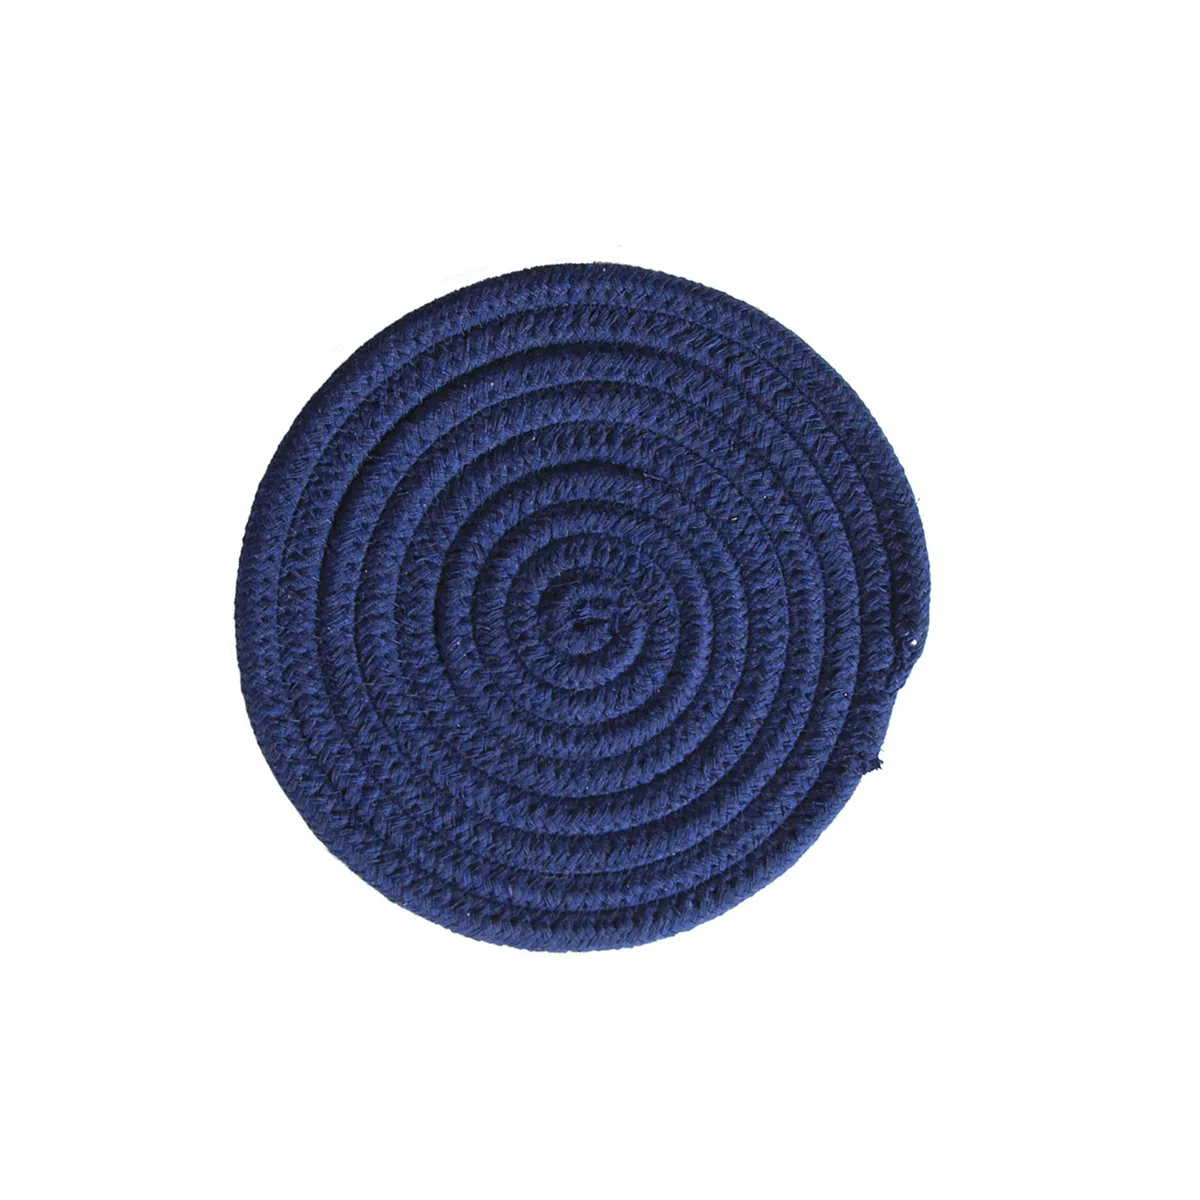 Round Braided Natural Woven Placemats Heat Resistant Cotton Placemat Dining Table